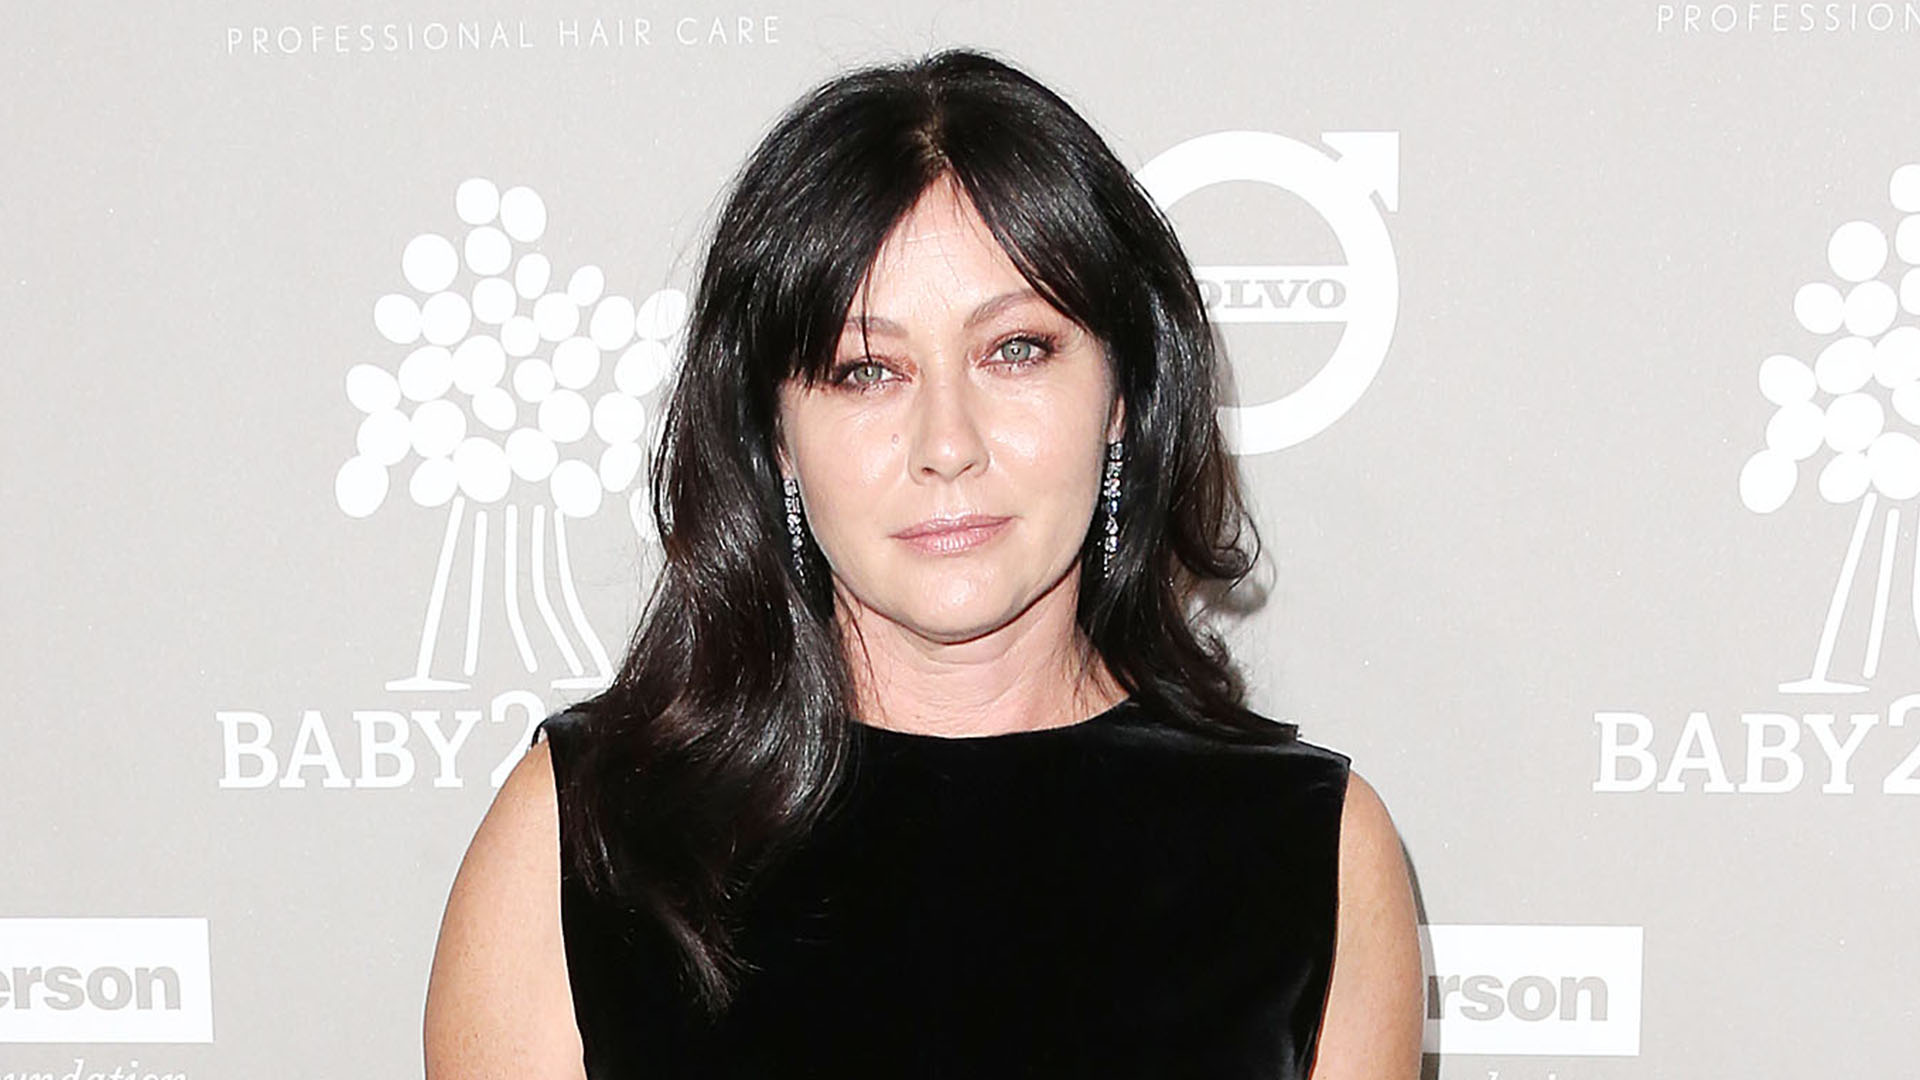 Shannen Doherty gives cancer update: I’m ‘fighting to stay alive’